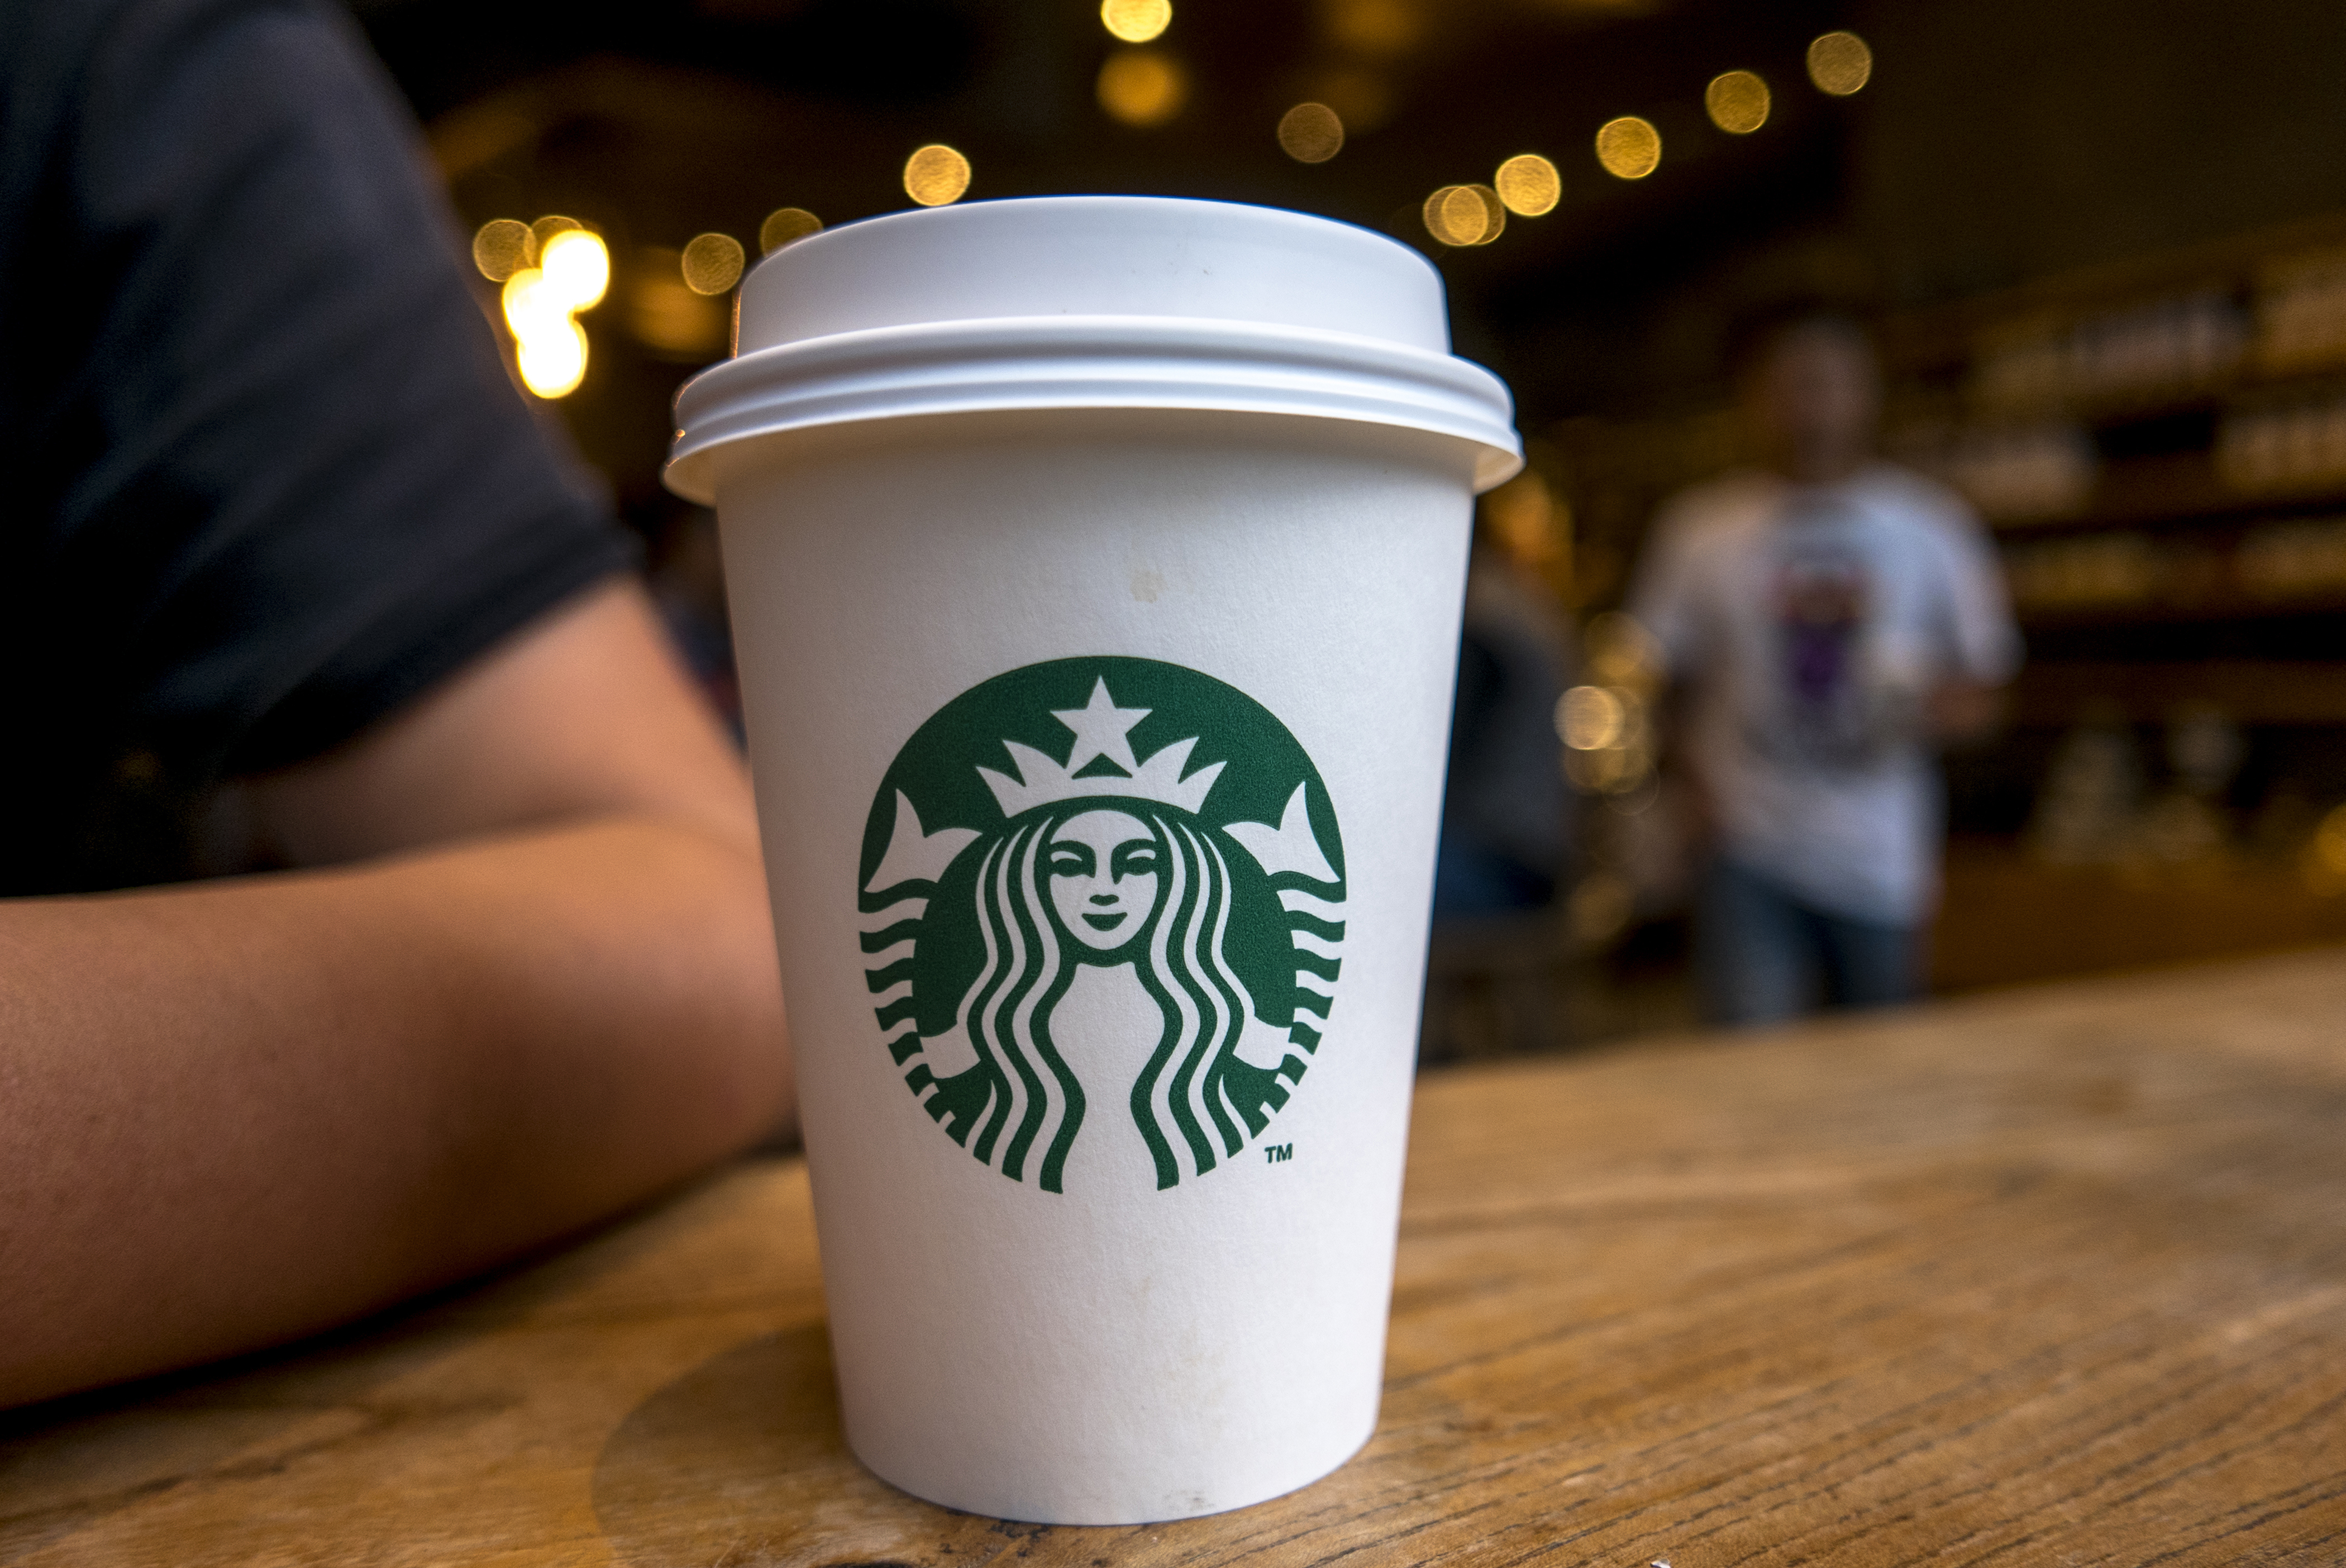 Coffee cup on table in a Starbucks cafe. (Zhang Peng&mdash;LightRocket/Getty Images)